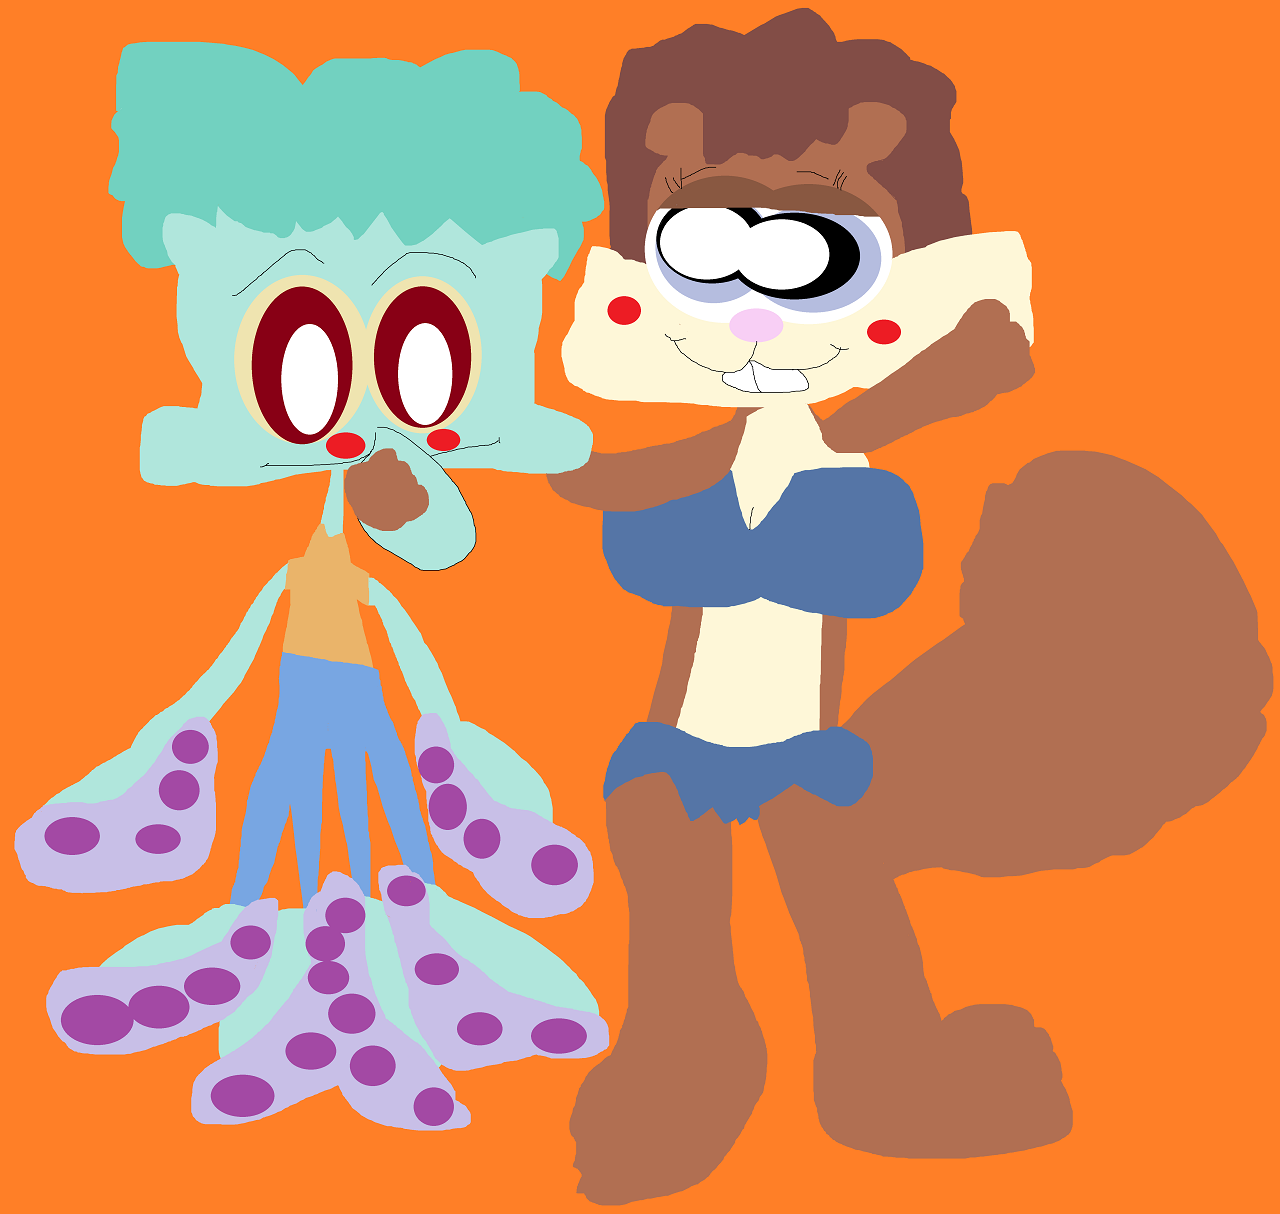 Squidward And Sandy In A Mix Of Styles^^ by Falconlobo